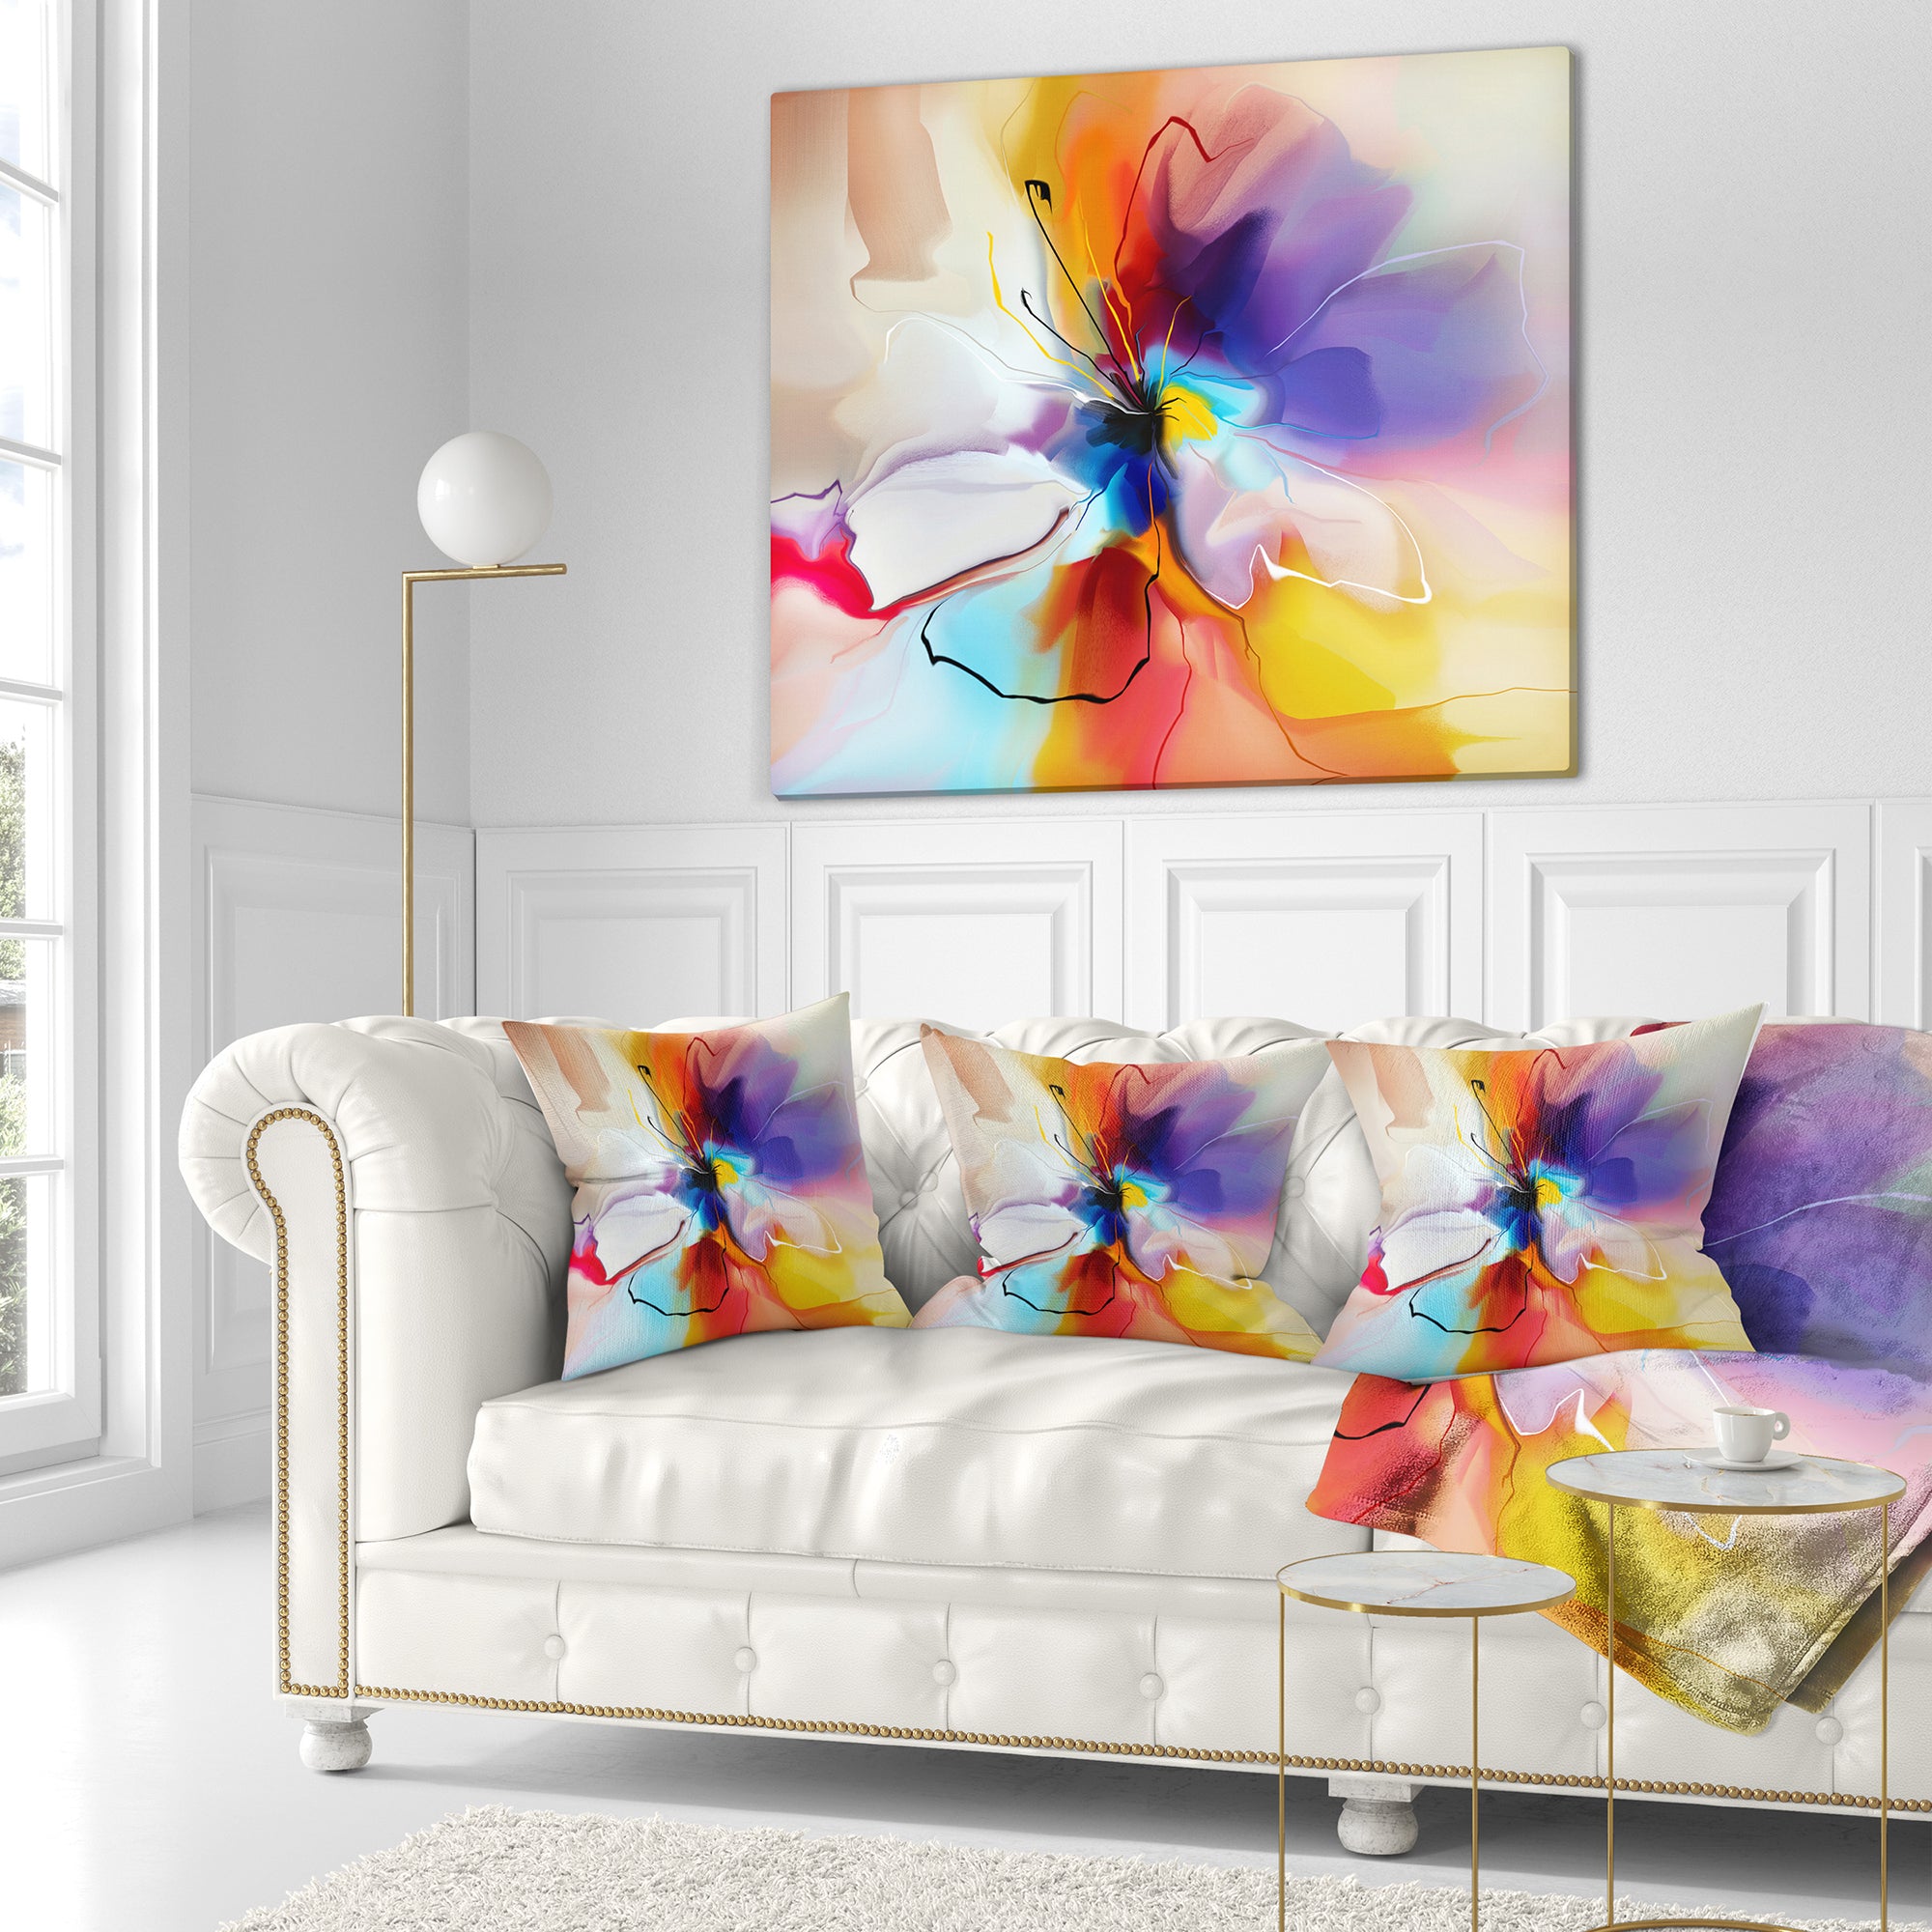 Creative Flower in Multiple Colors - Floral Throw Pillow